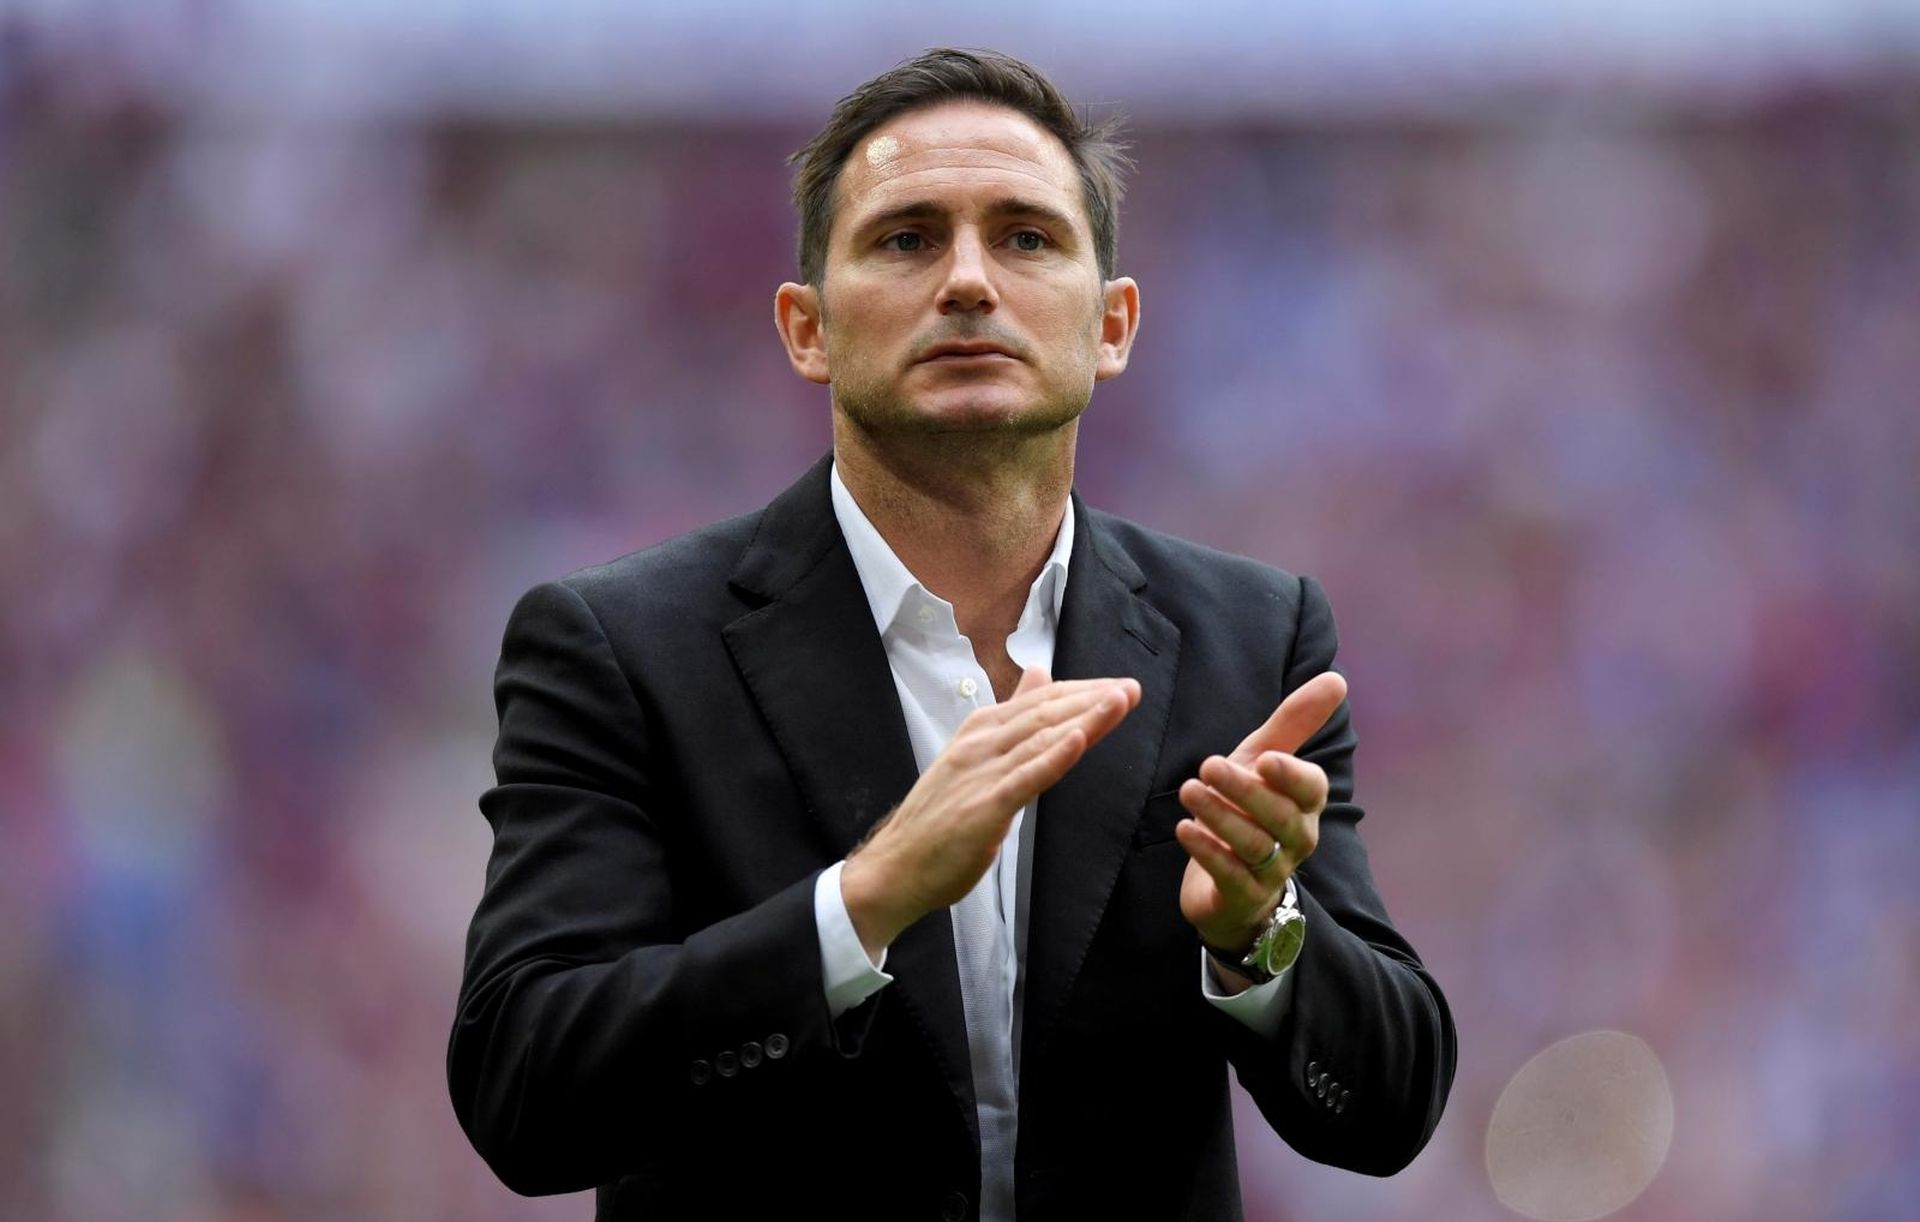 FILE PHOTO: Championship Playoff Final - Aston Villa v Derby County FILE PHOTO: Soccer Football - Championship Playoff Final - Aston Villa v Derby County - Wembley Stadium, London, Britain - May 27, 2019  Derby County manager Frank Lampard looks dejected as he applauds the fans after the match   Action Images via Reuters/Tony O'Brien/File Photo Tony O'Brien